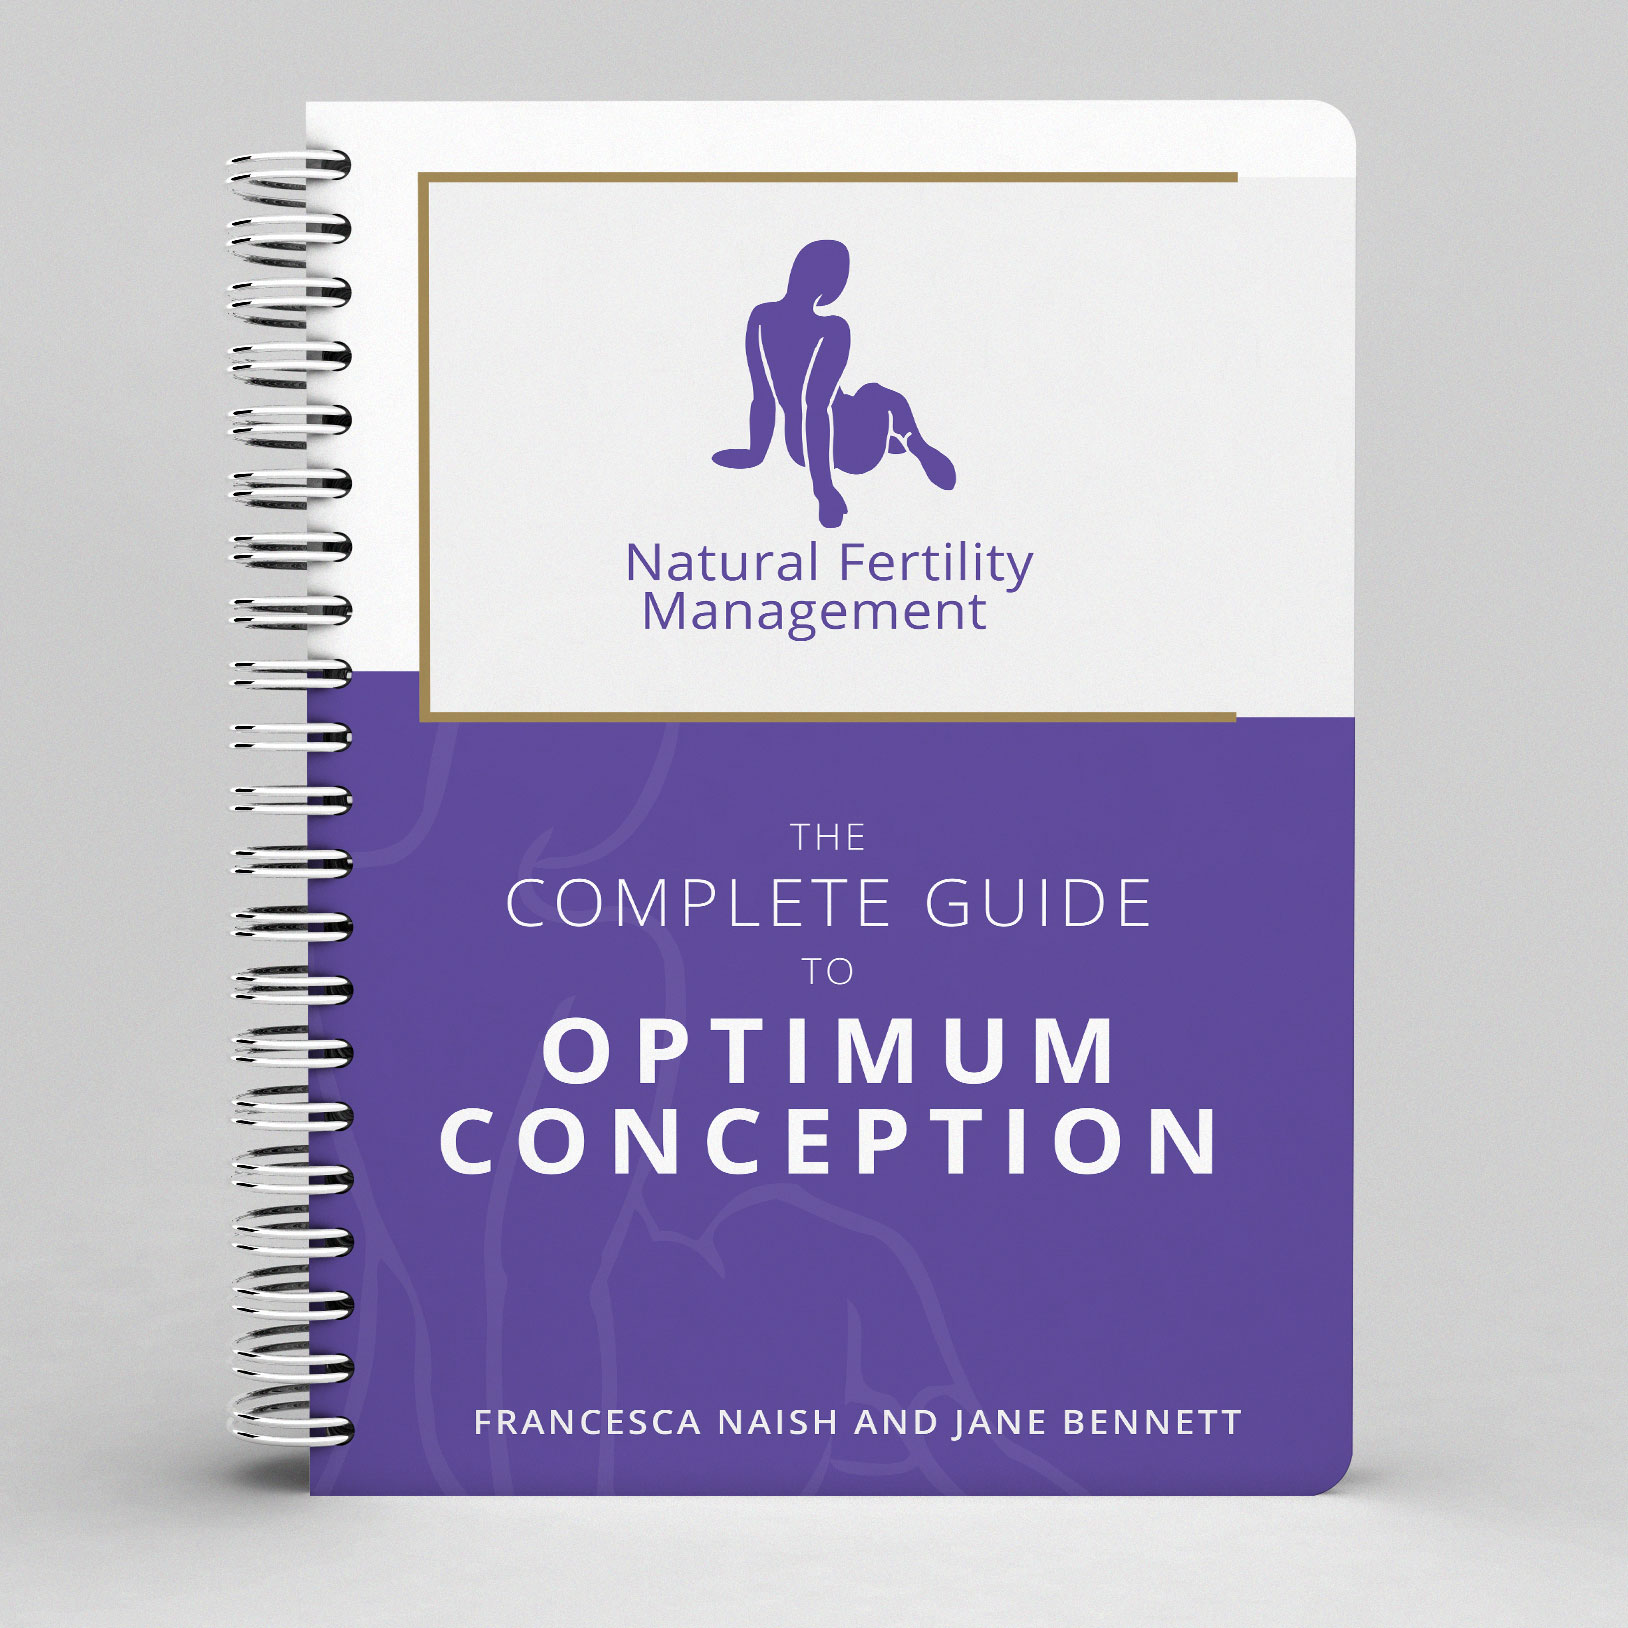 In this Guide you’ll learn all about the Natural Fertility Management approach to optimum conception, with particular conditions and circumstances covered in detail, for instance PCOS, endometriosis, miscarriage, male fertility issues and more.